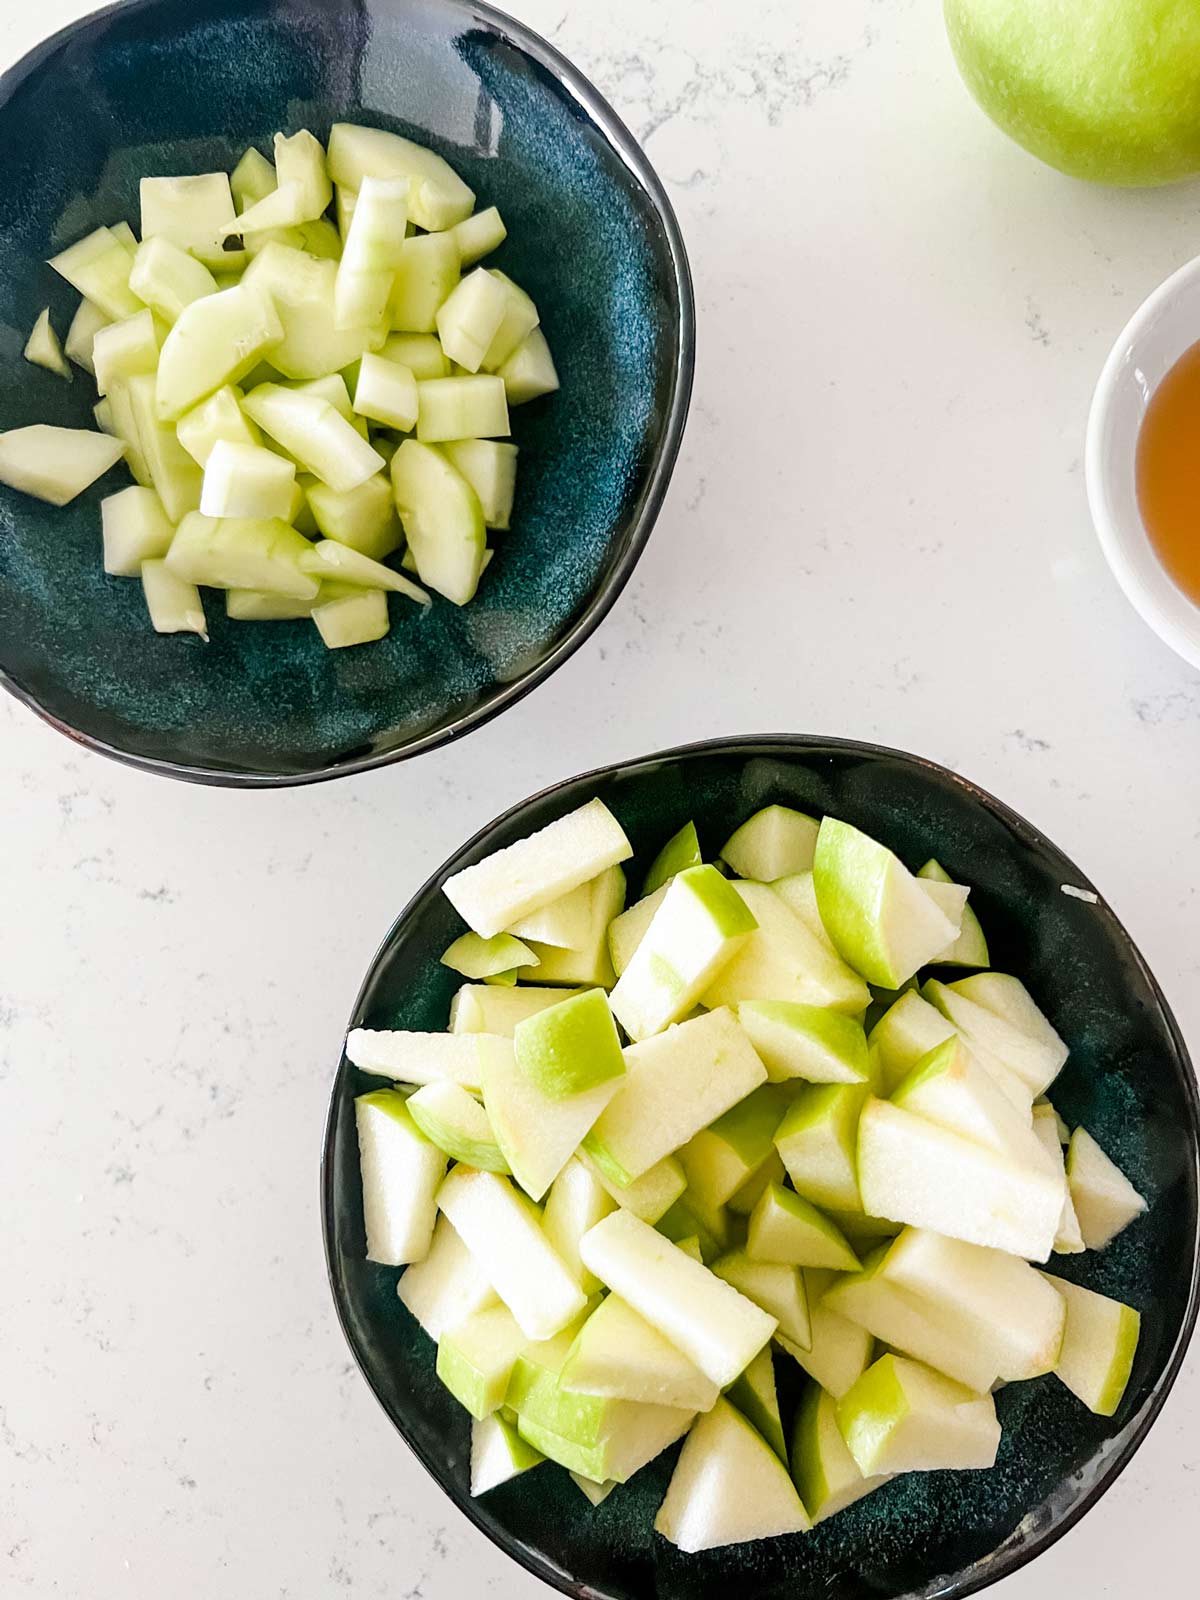 Chopped apple and chopped cucumber.